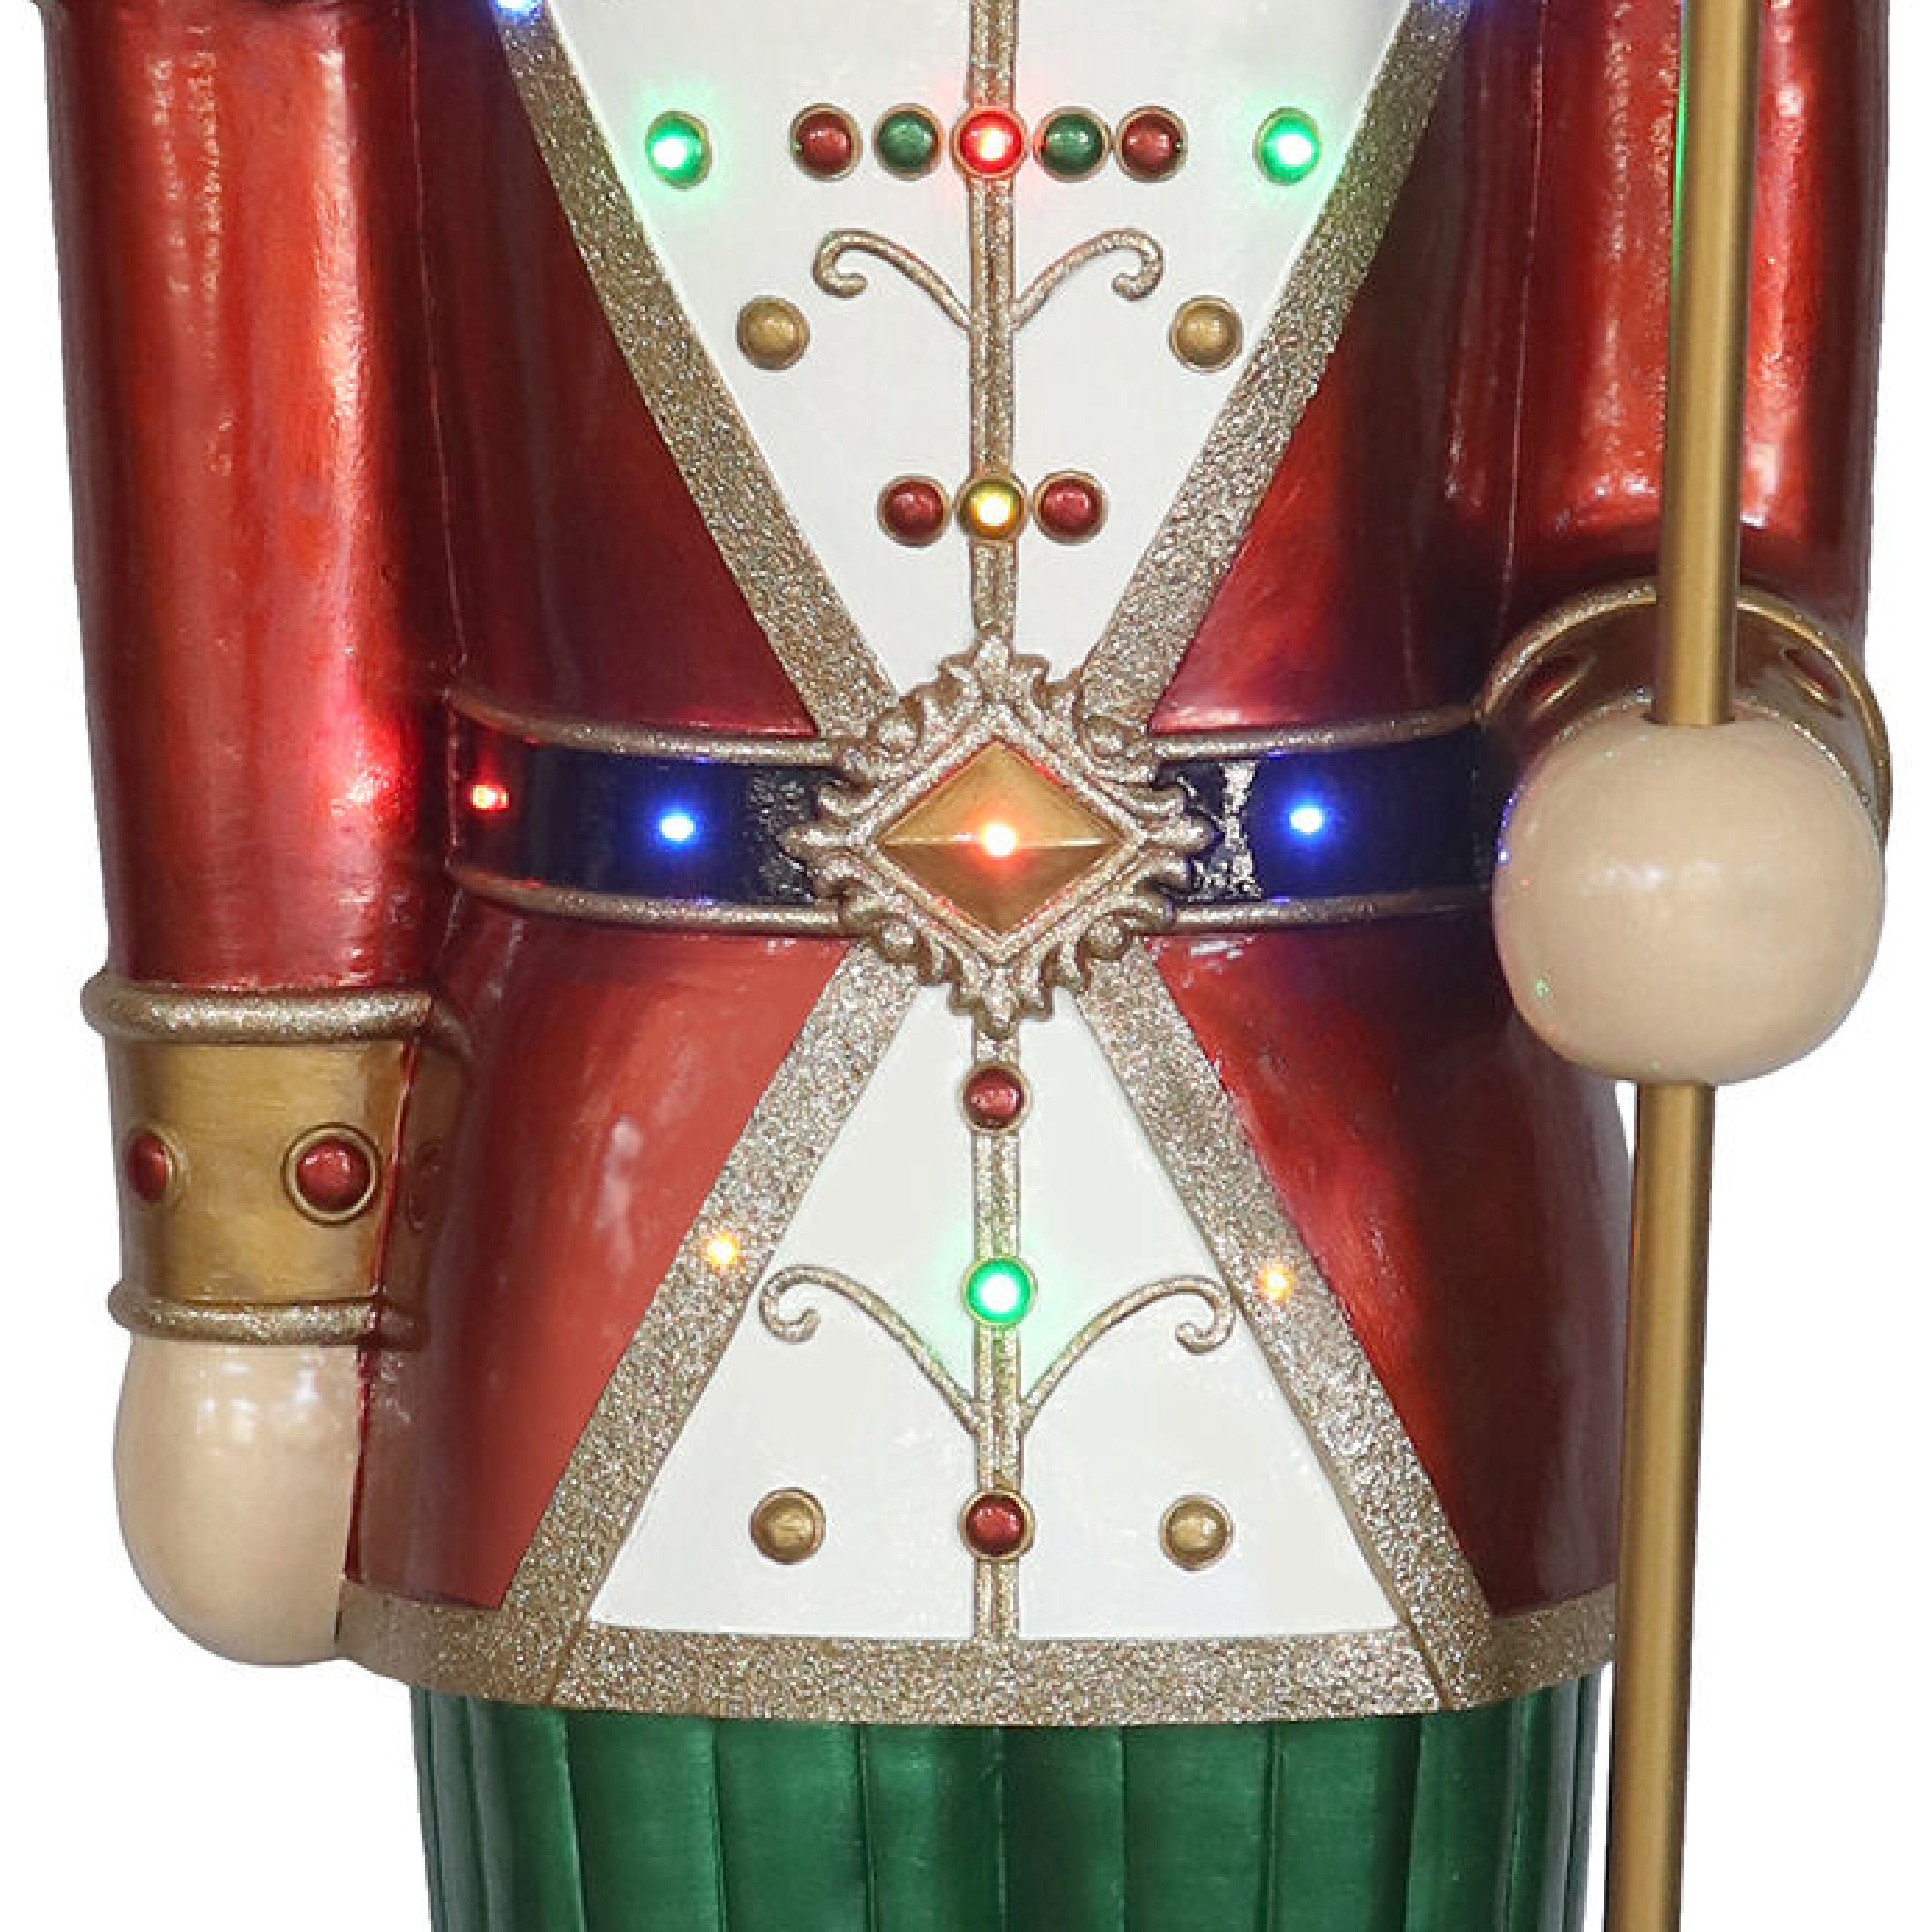 Fraser Hill Farm - 76-inch Resin Nutcracker Figurine Holding Staff with Built-in Multicolor LED Lights